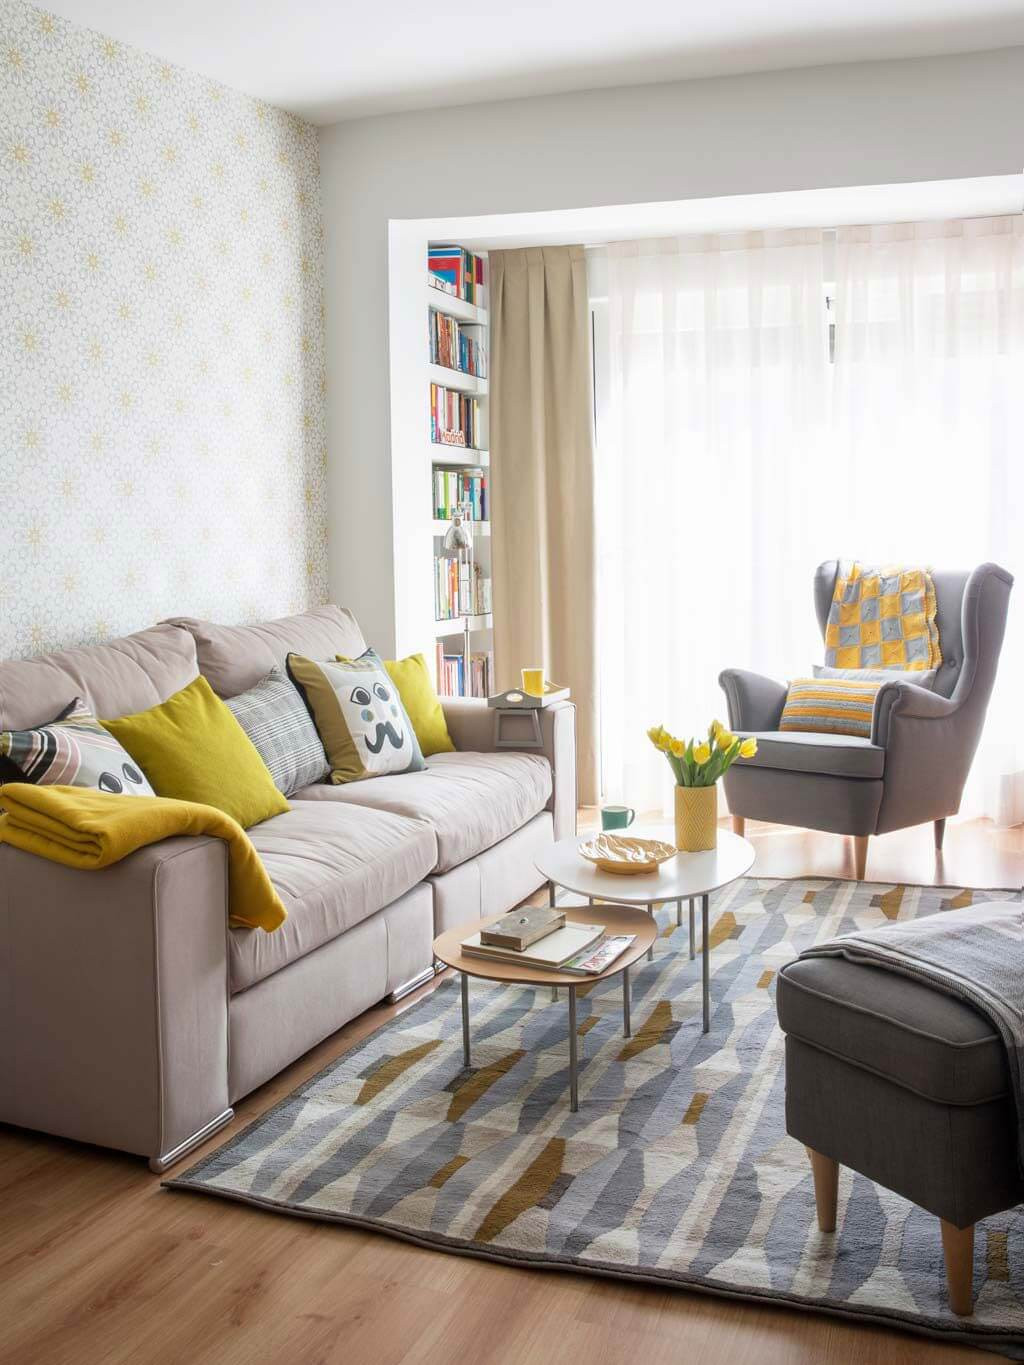 Seating For Small Living Room
 25 Best Small Living Room Decor and Design Ideas for 2019